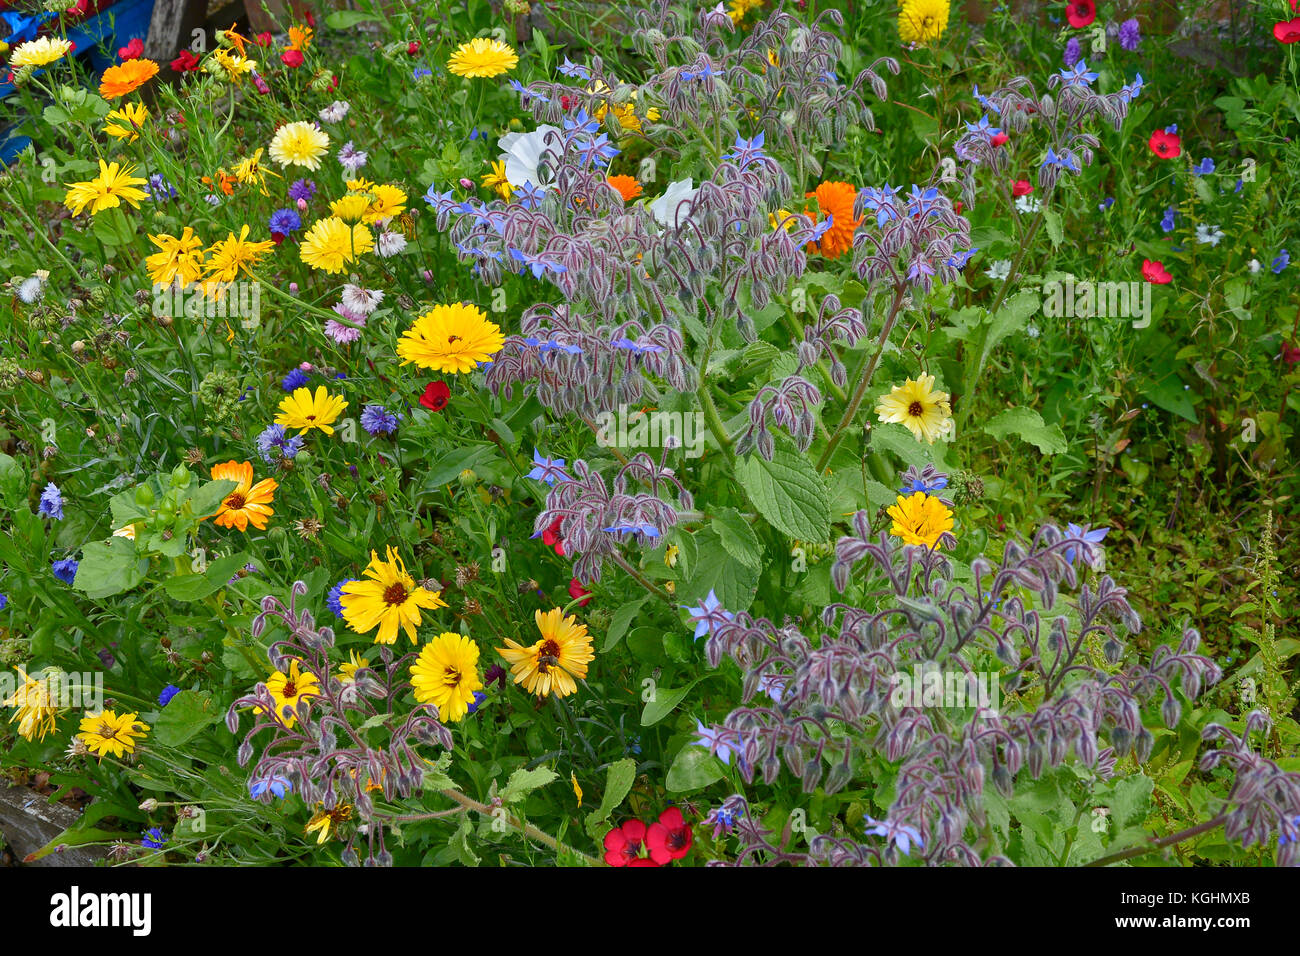 A colourful flower meadow with mixed planting including Calendula officinalis, Borage, Marigolds and Lavatera Stock Photo